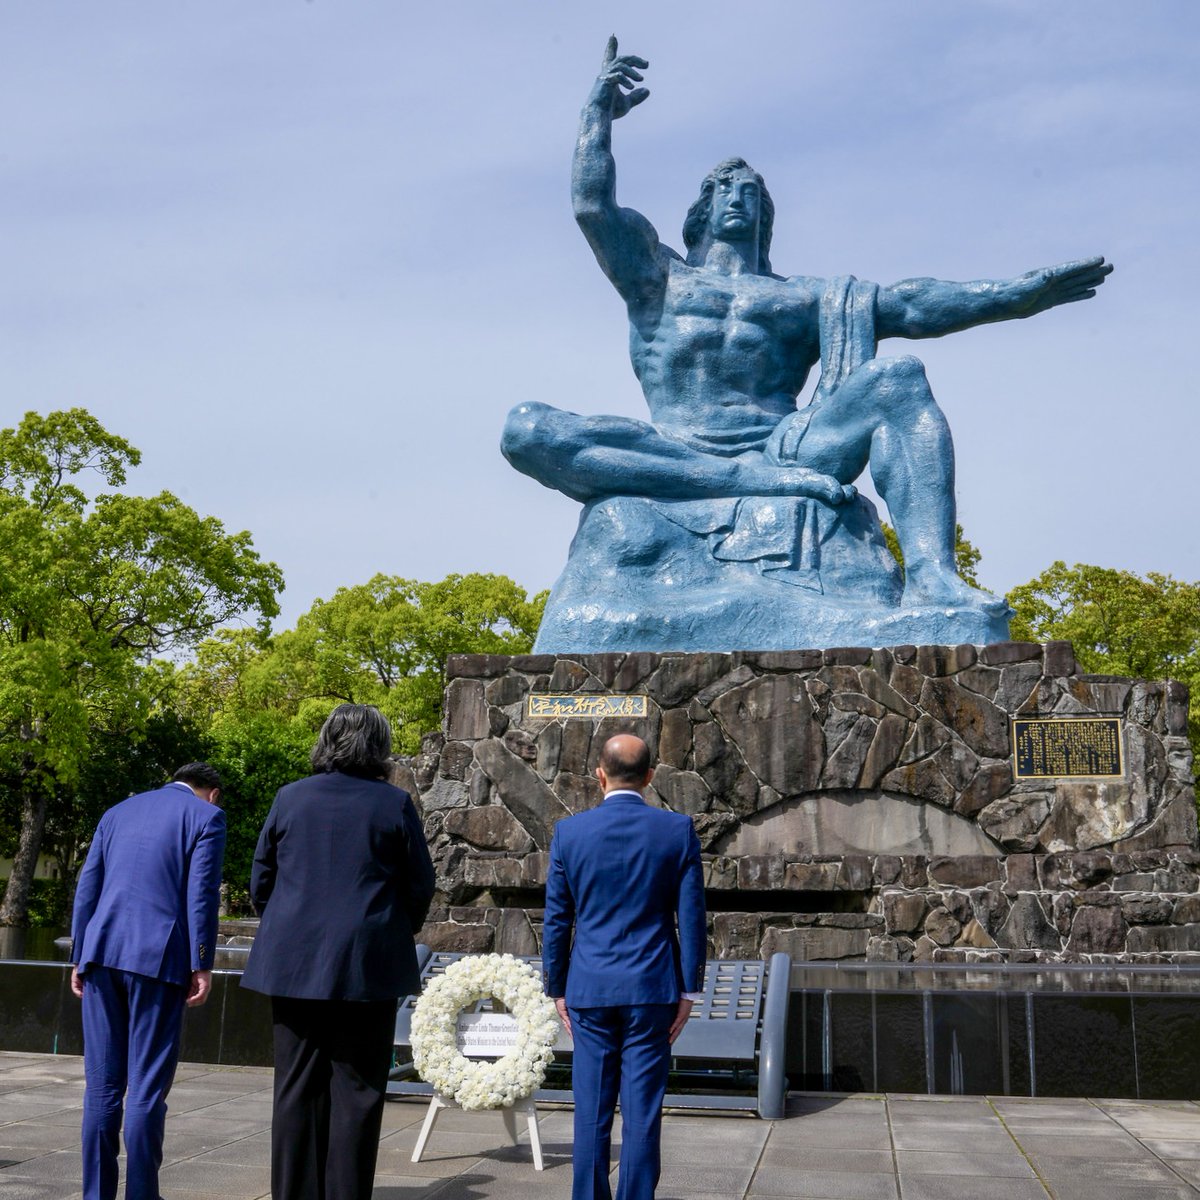 At the Peace Park in Nagasaki, I paid my respects to the victims of the atomic bombing on August 9, 1945. Today, I am reminded of our responsibility – as governments, as allies, and as human beings – to end the scourge of war, once and for all.